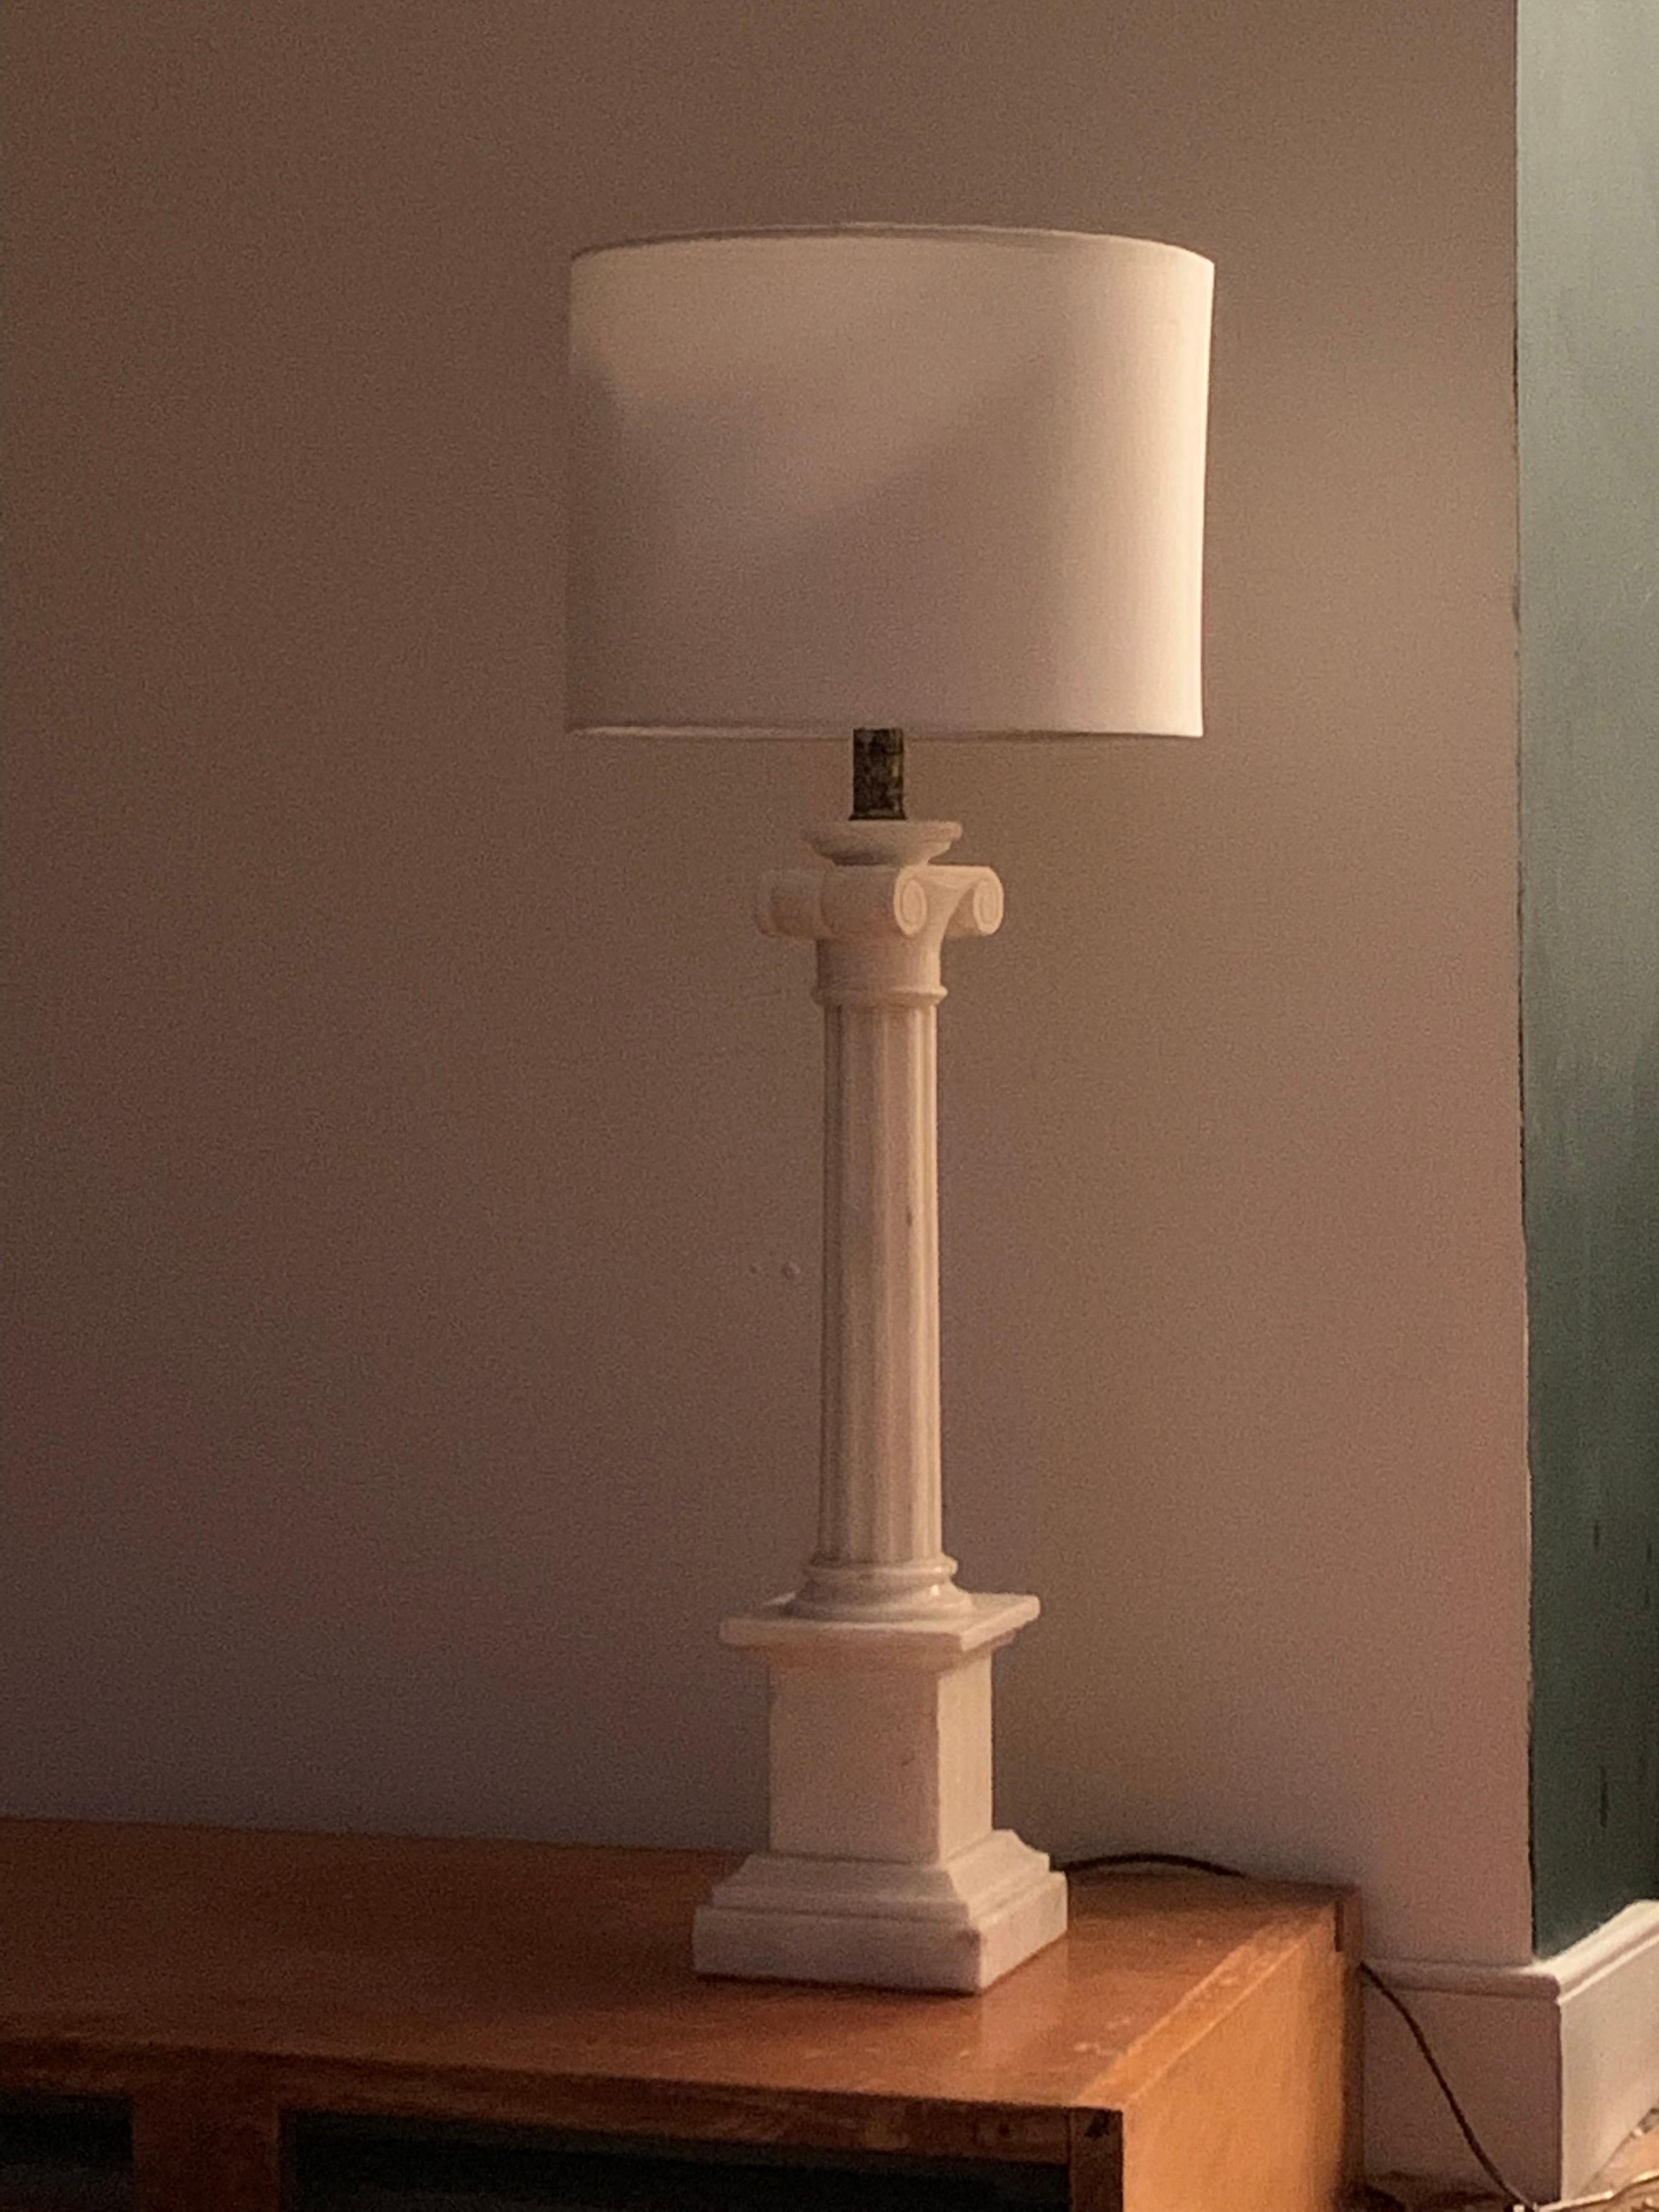 Hollywood Regency Midcentury Neoclassical White Marble Ionic Column Table Lamp, 1960s Marbro Lamp